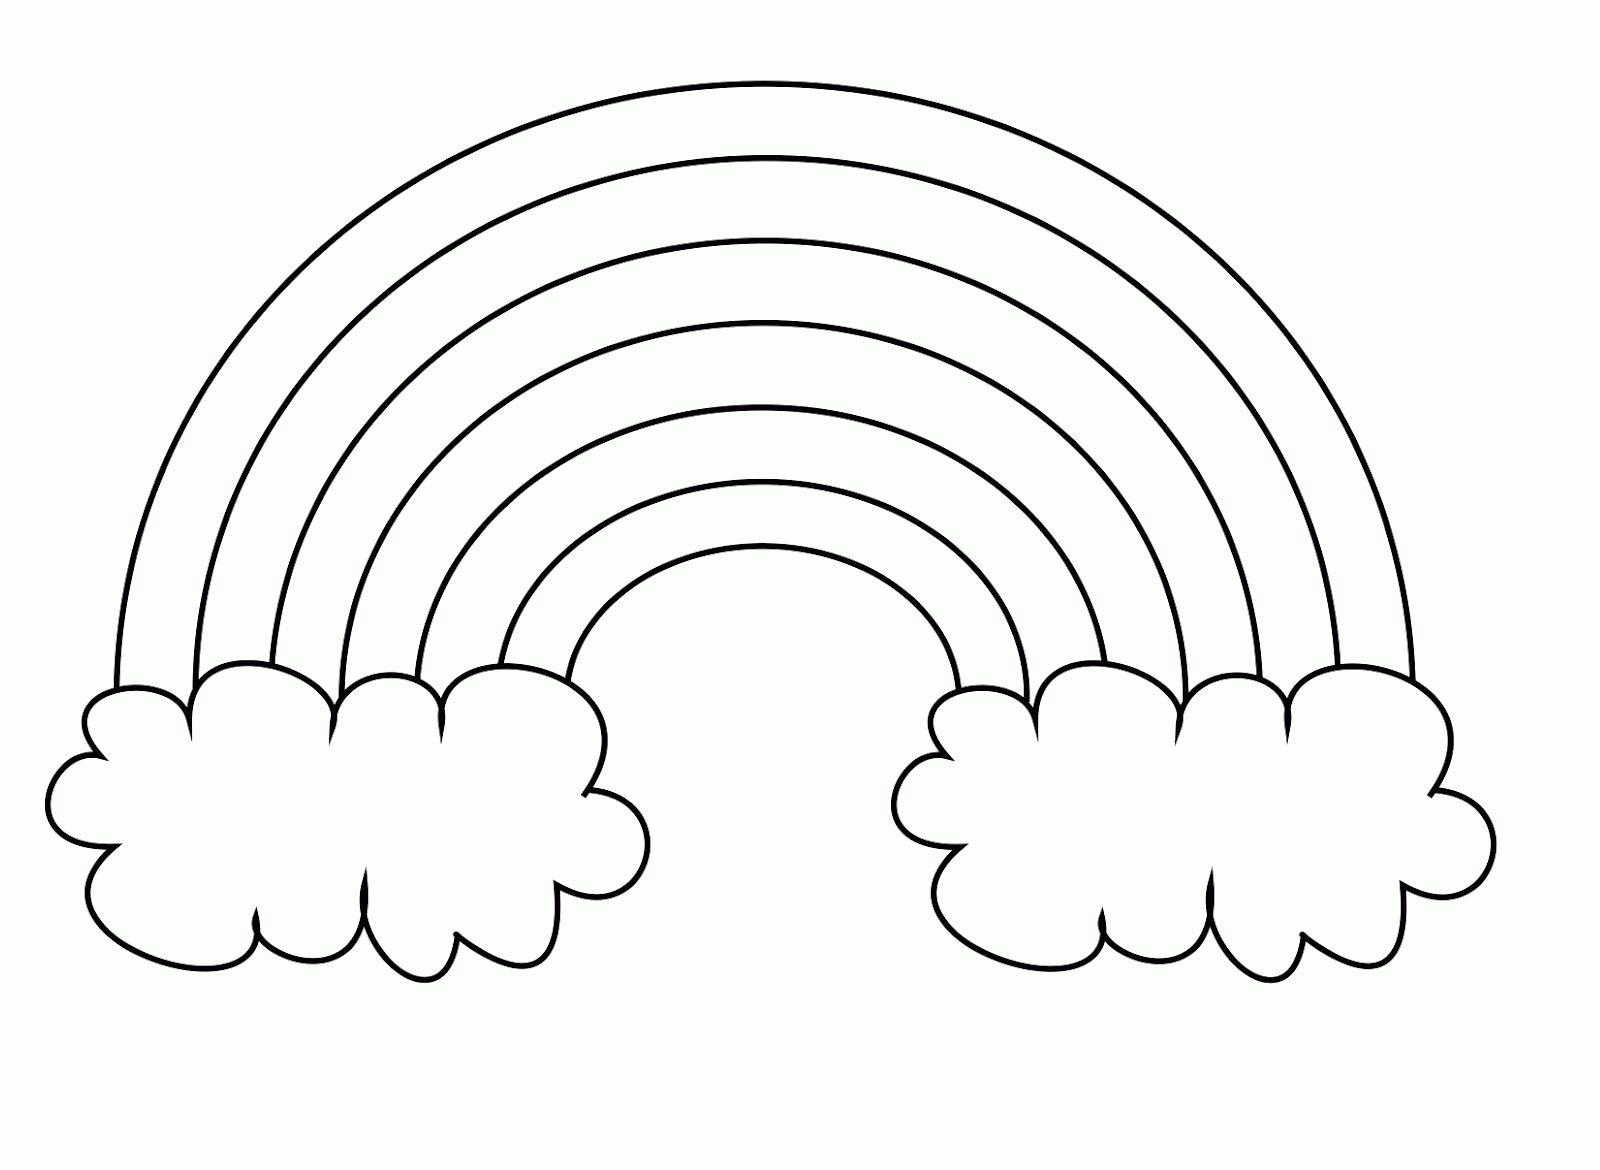 Preschool Coloring Pages Of Rainbows - Coloring Home